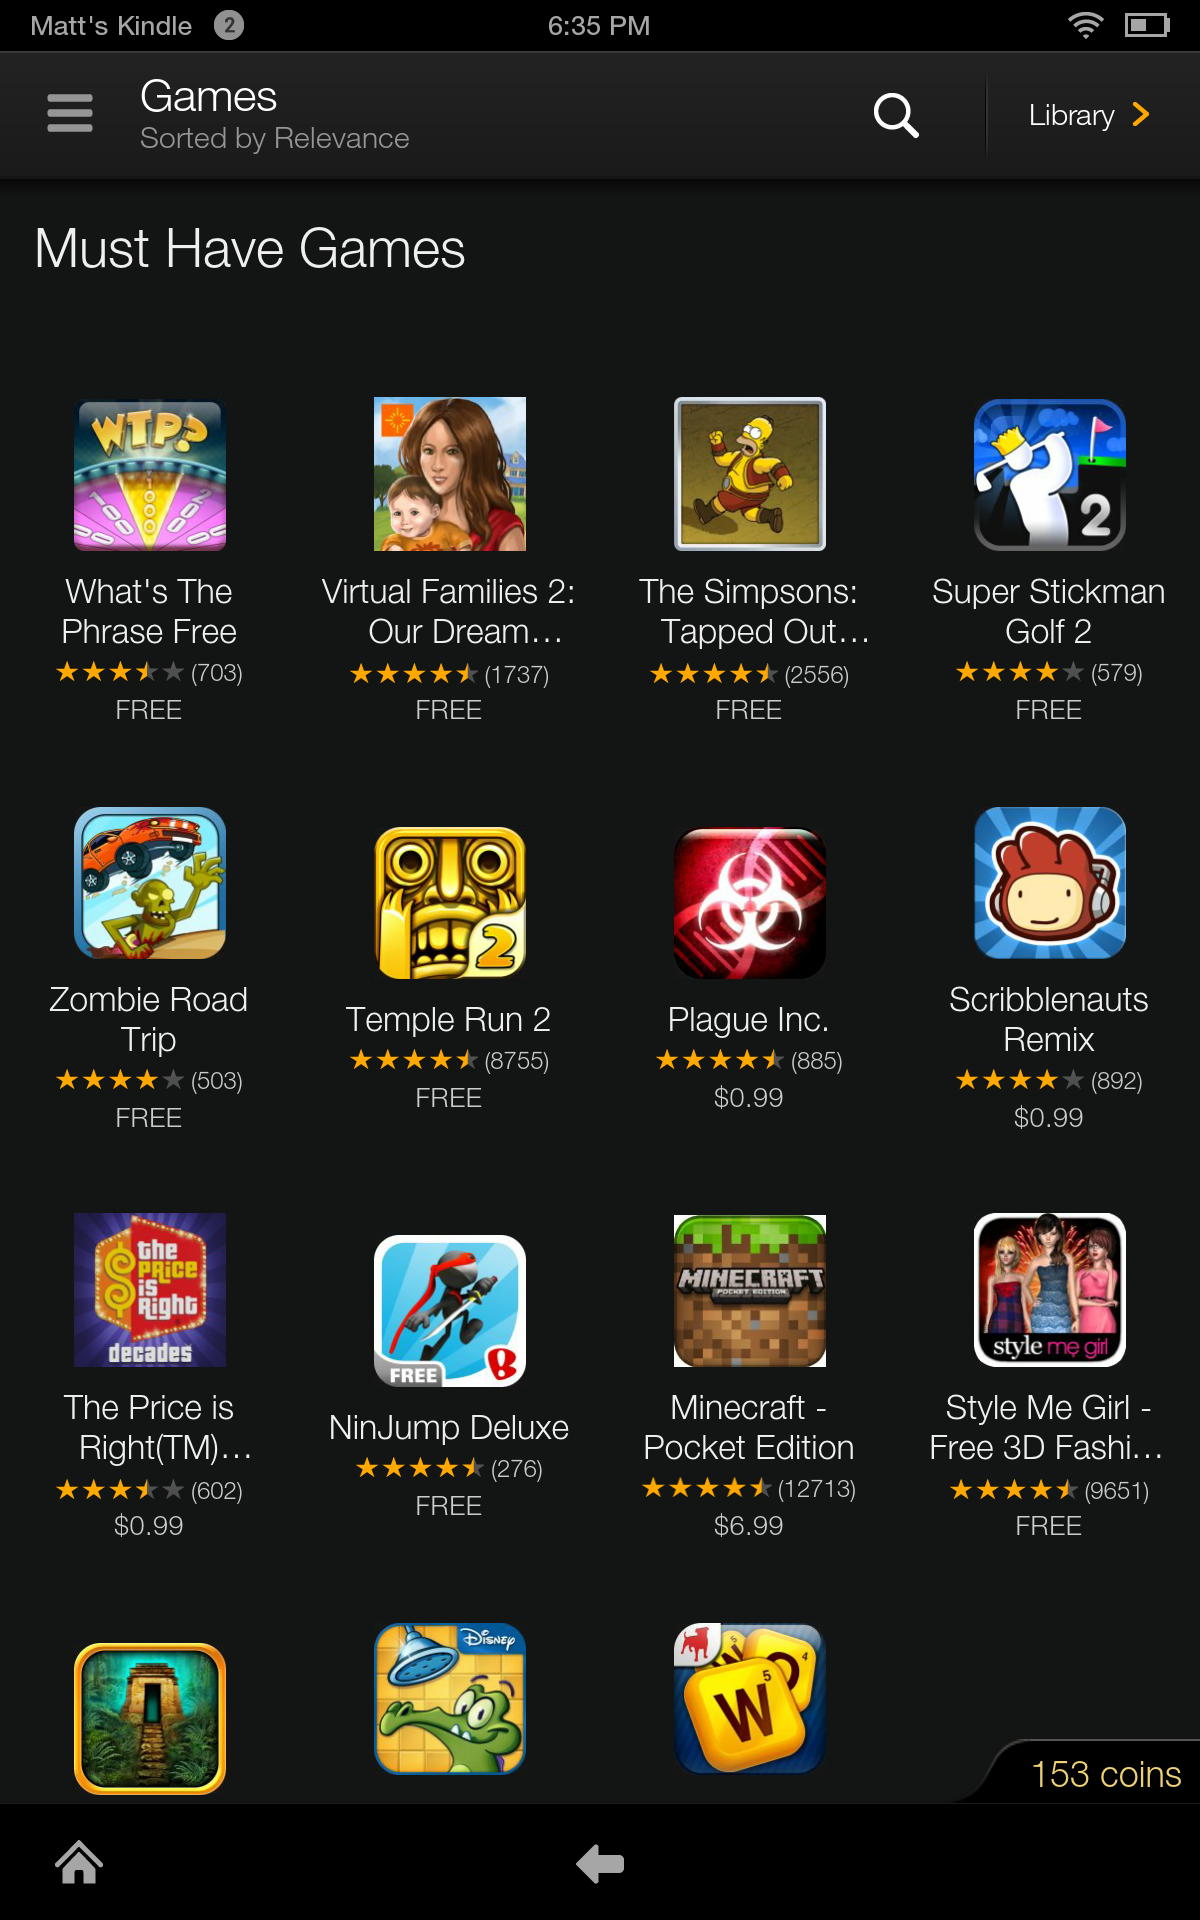 Get Minecraft Pocket Edition for your Kindle Fire! Free and Legal!